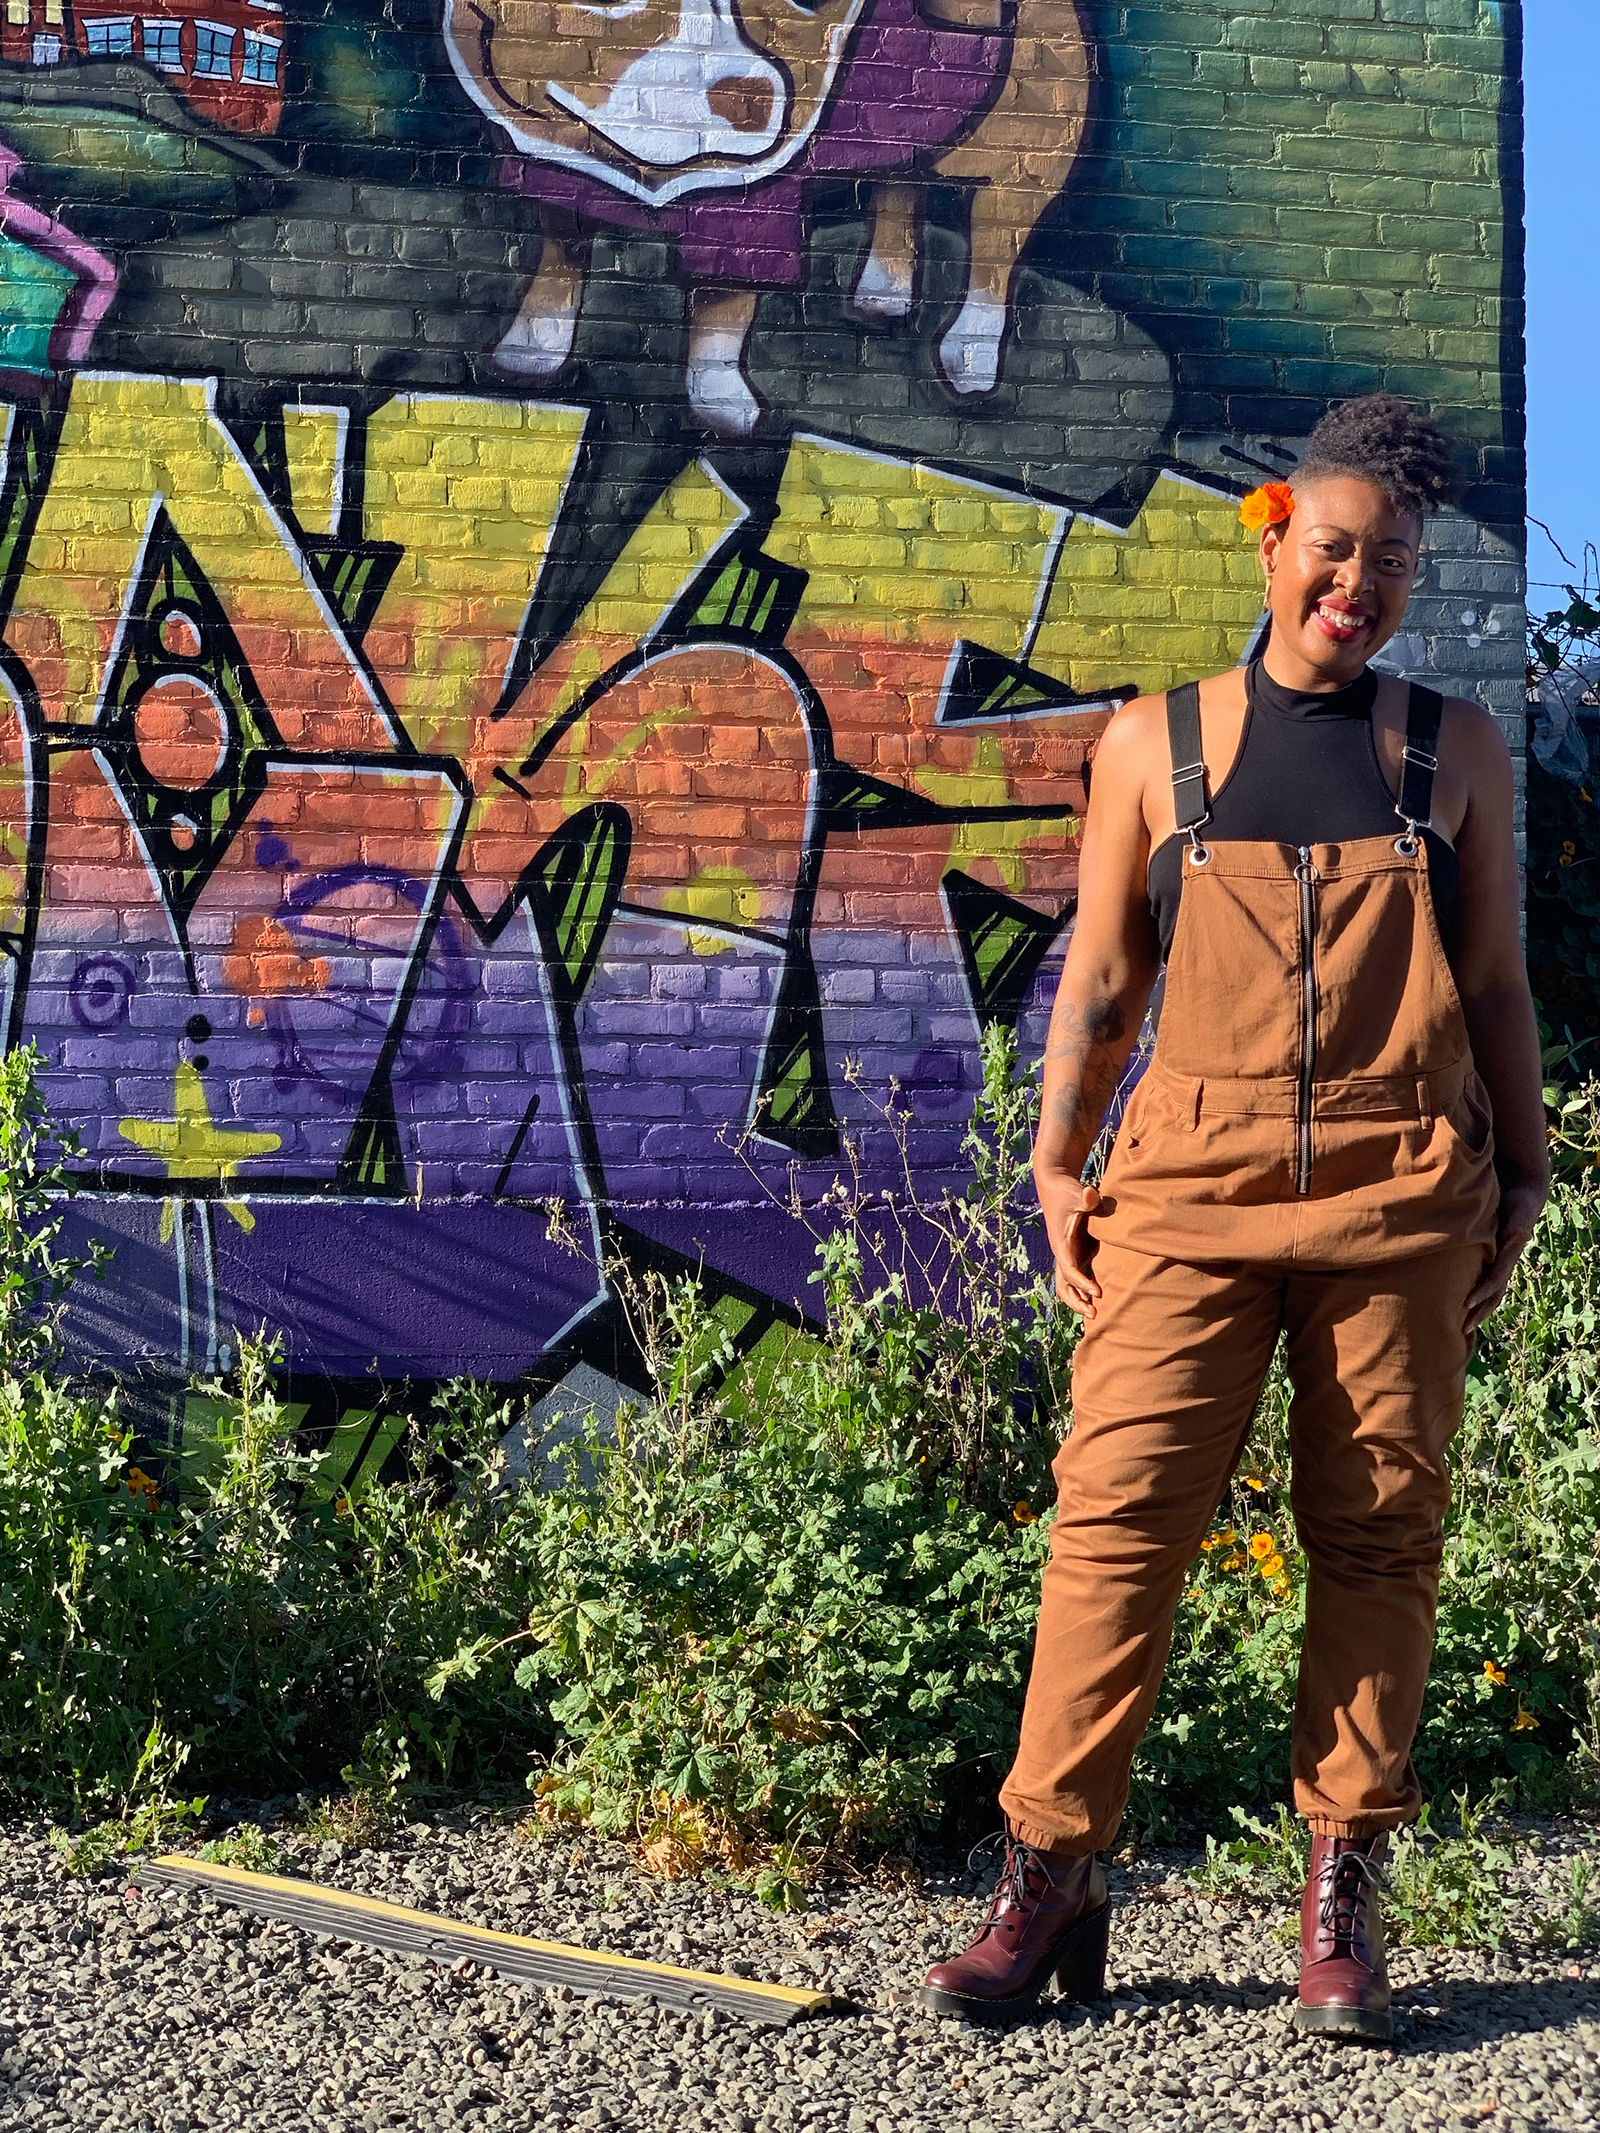 Ayana Omilade Flewellen stands in front of a wall with colorful murals outside, wearing overalls, smiling